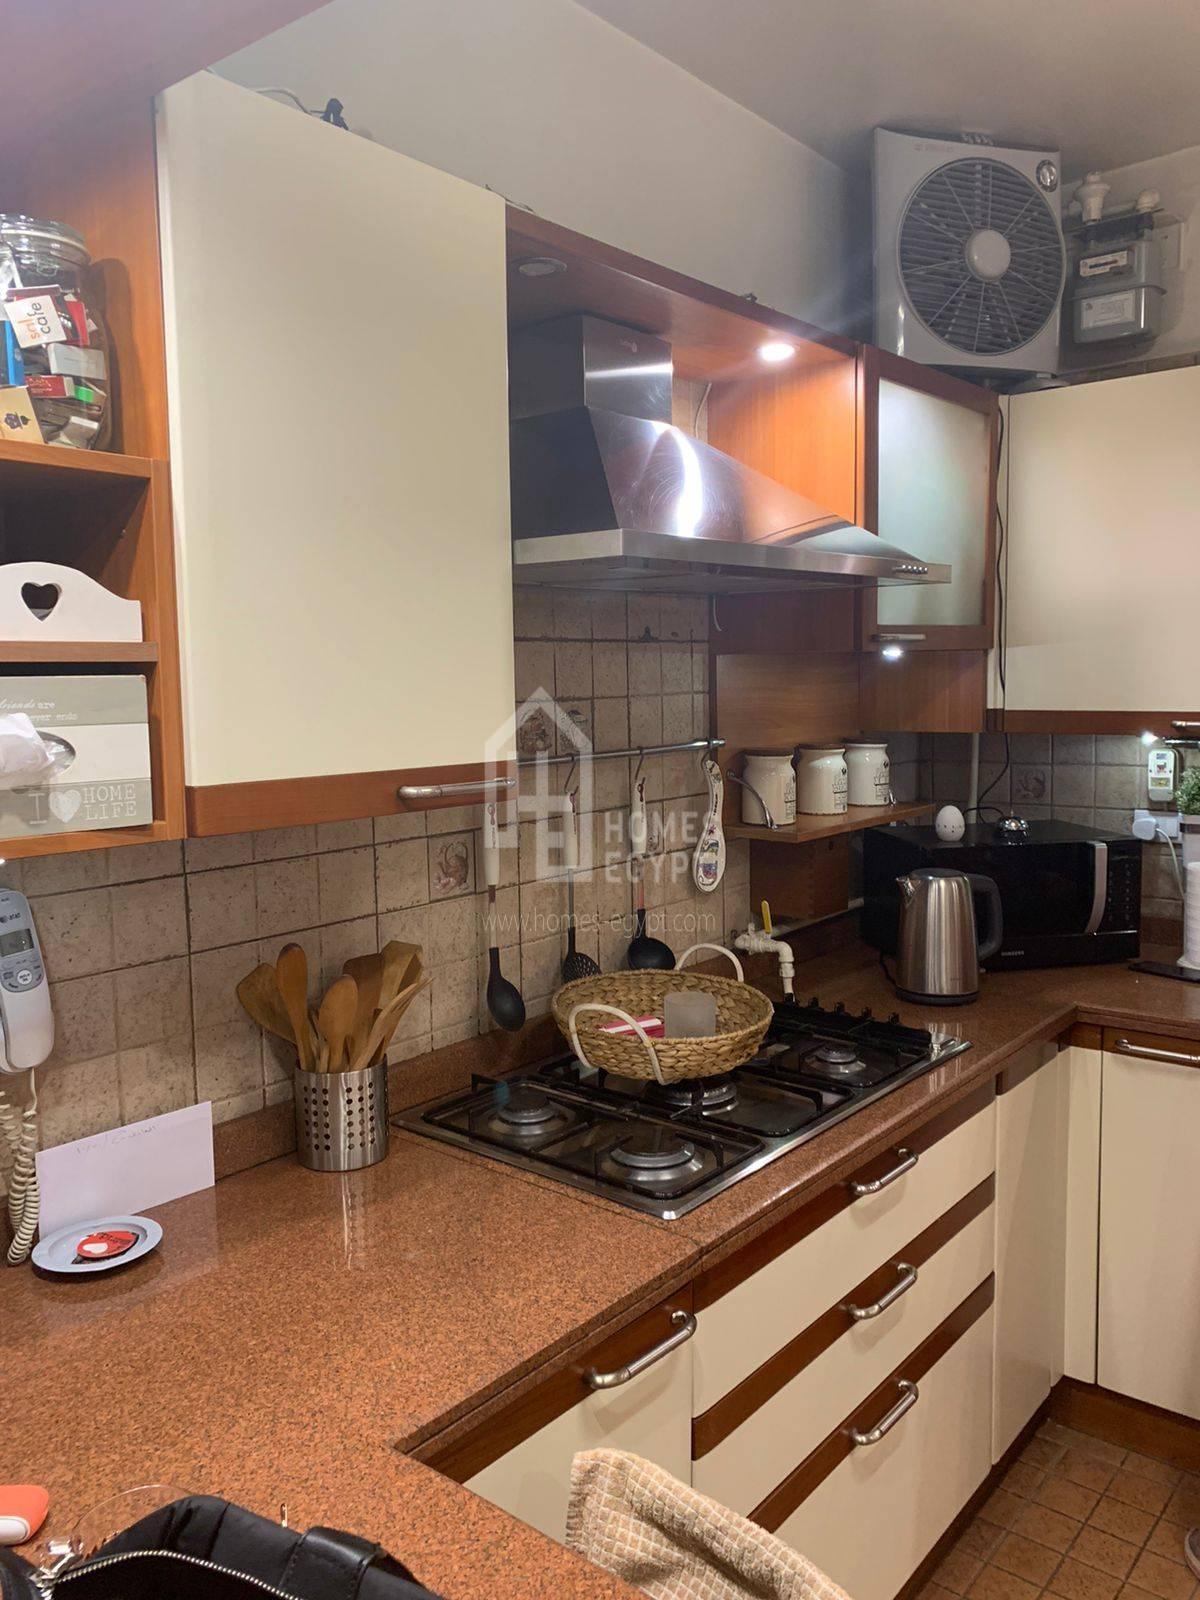 Utra Modern Apartment For Rent In Sarayat Maadi

The Apartment Features : 3 bedrooms

2 bathrooms

Modern furniture Very Clean flat brighten Fully equipped Vintage kitchen

Marble floor in the reception area

bedrooms with wooden floor Balcony